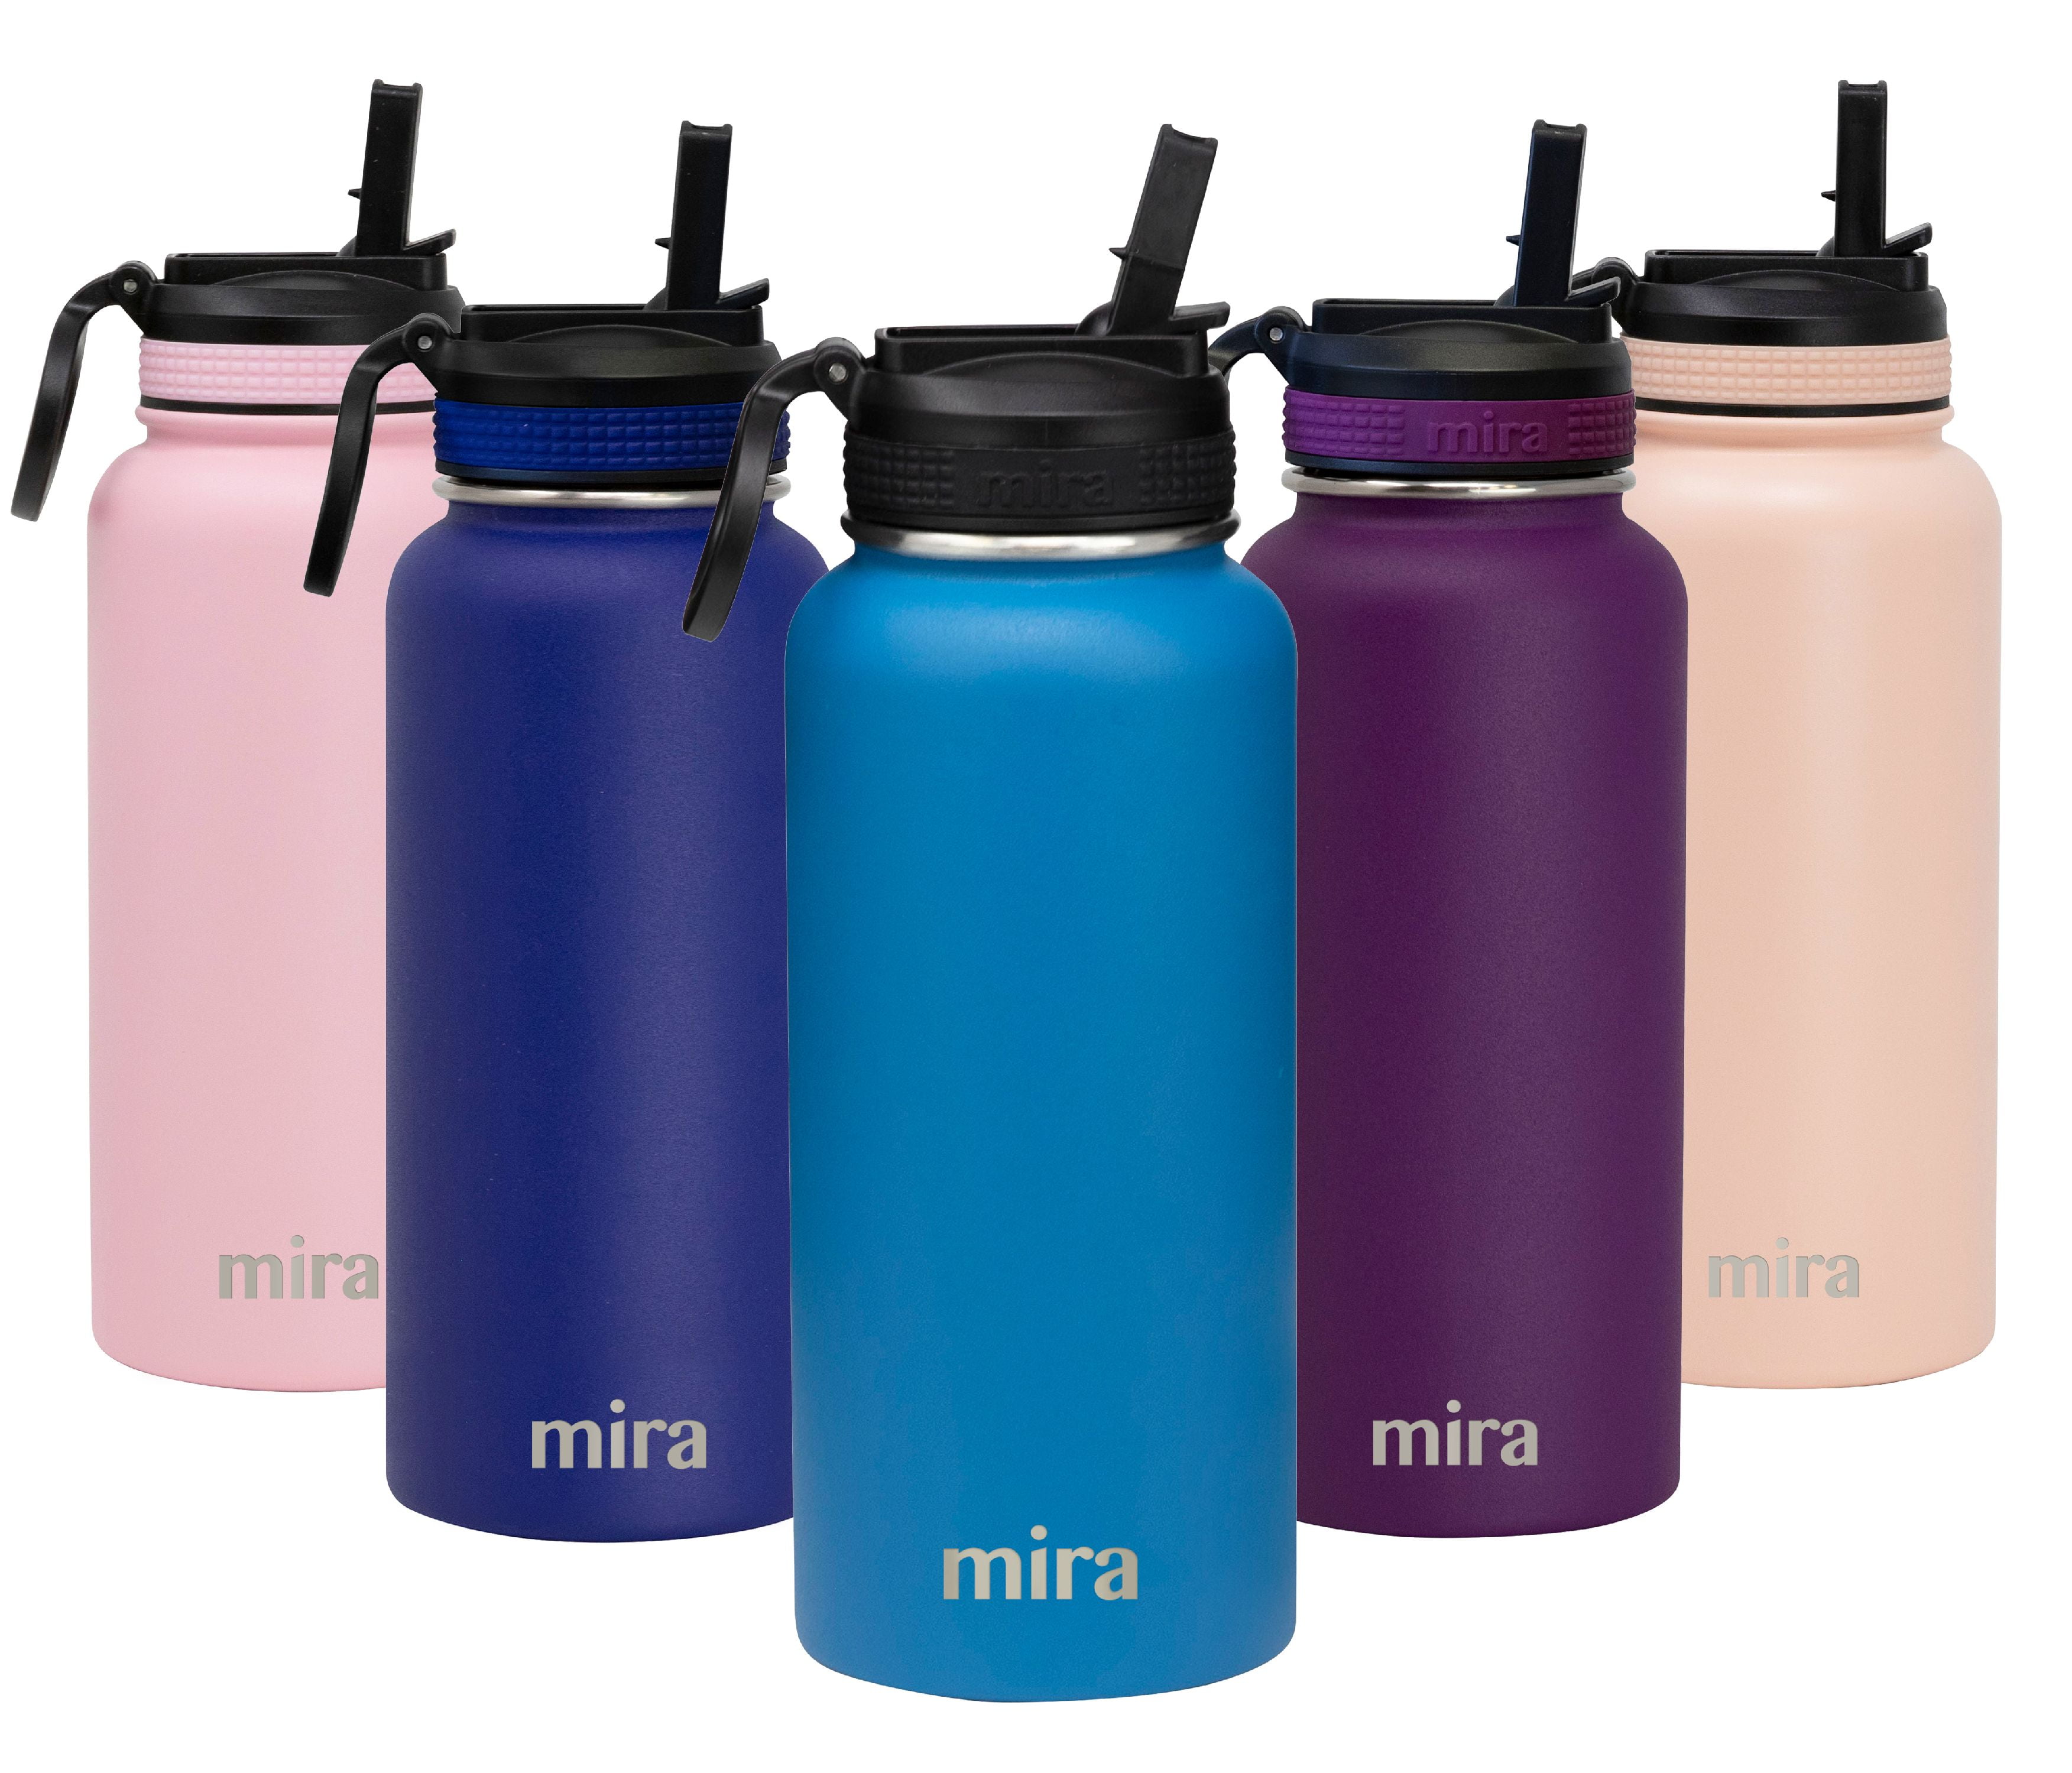 Small stainless steel water bottle